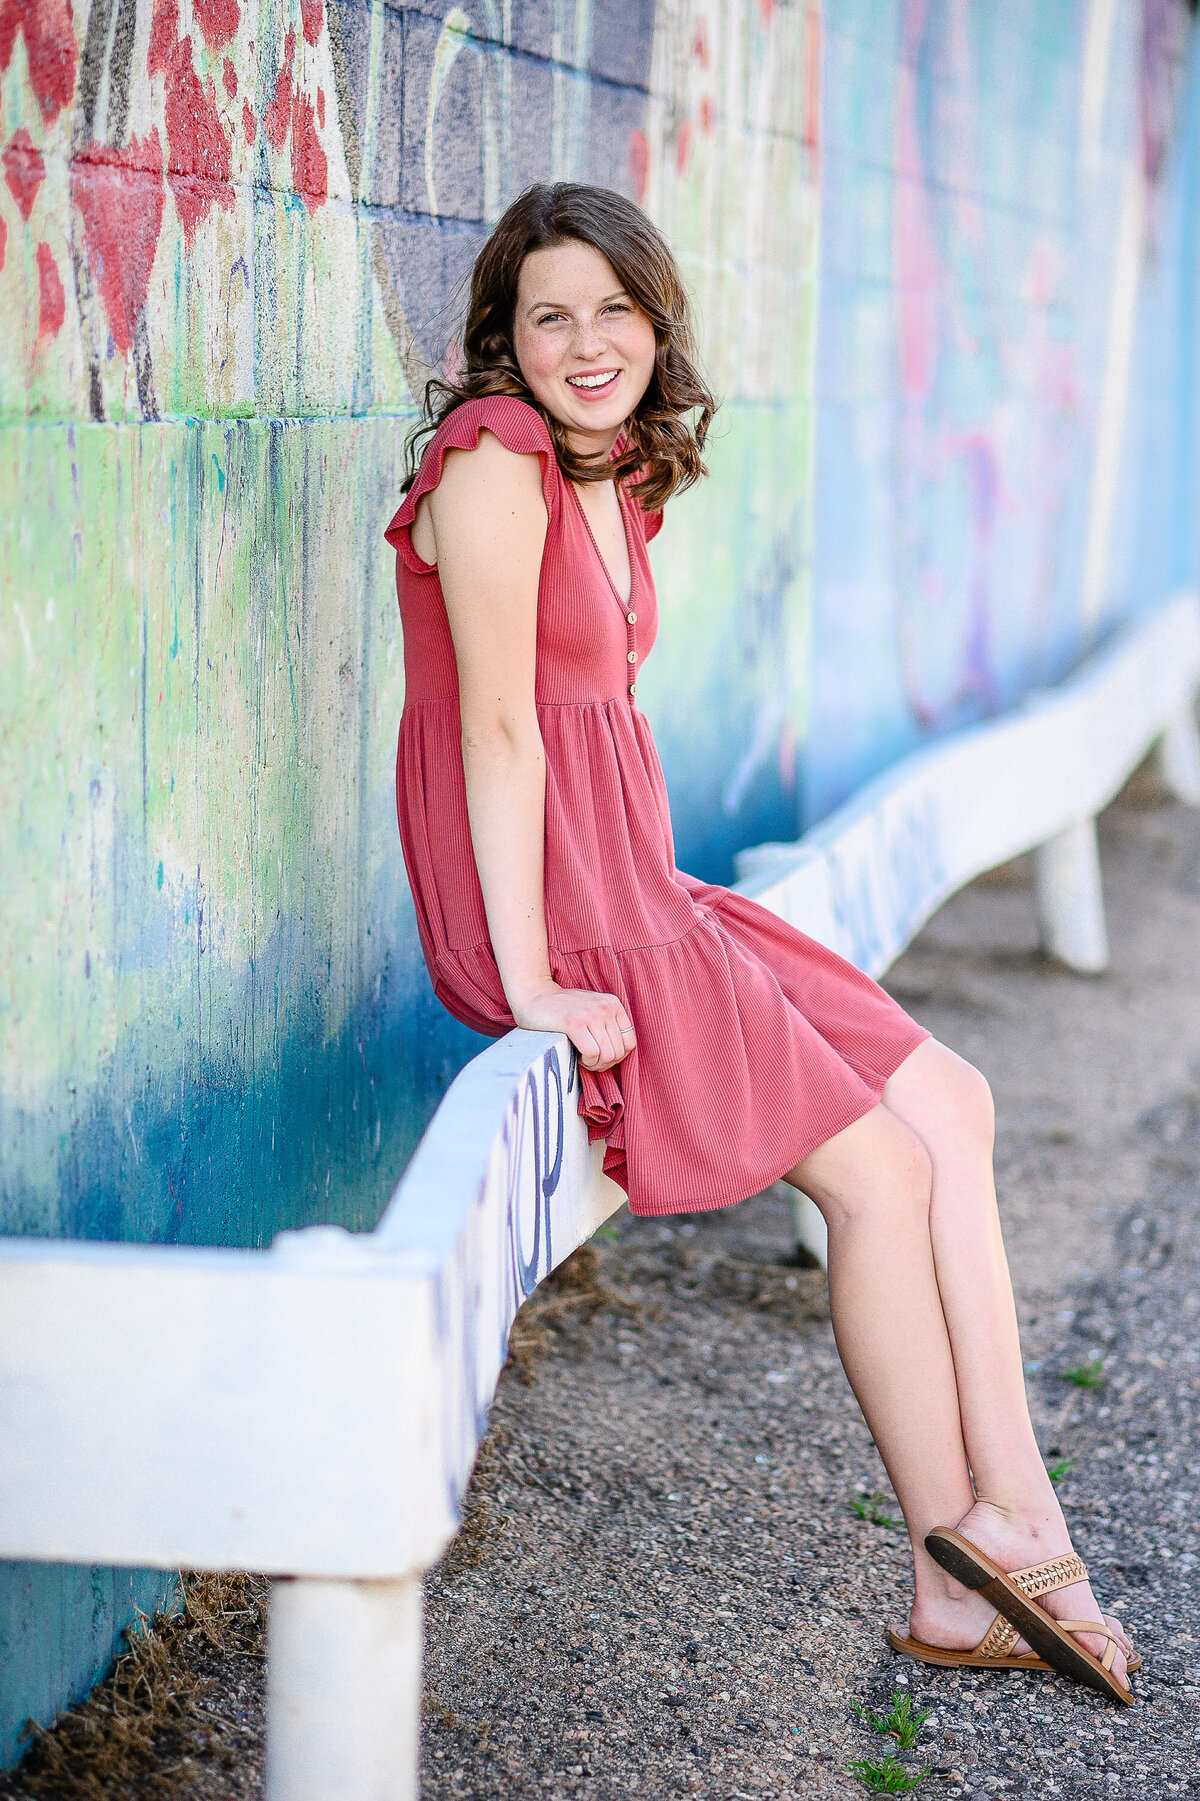 Littleton senior photographer captures a girl in a pink dress sitting on a white ledge with a mural painted wall behind her